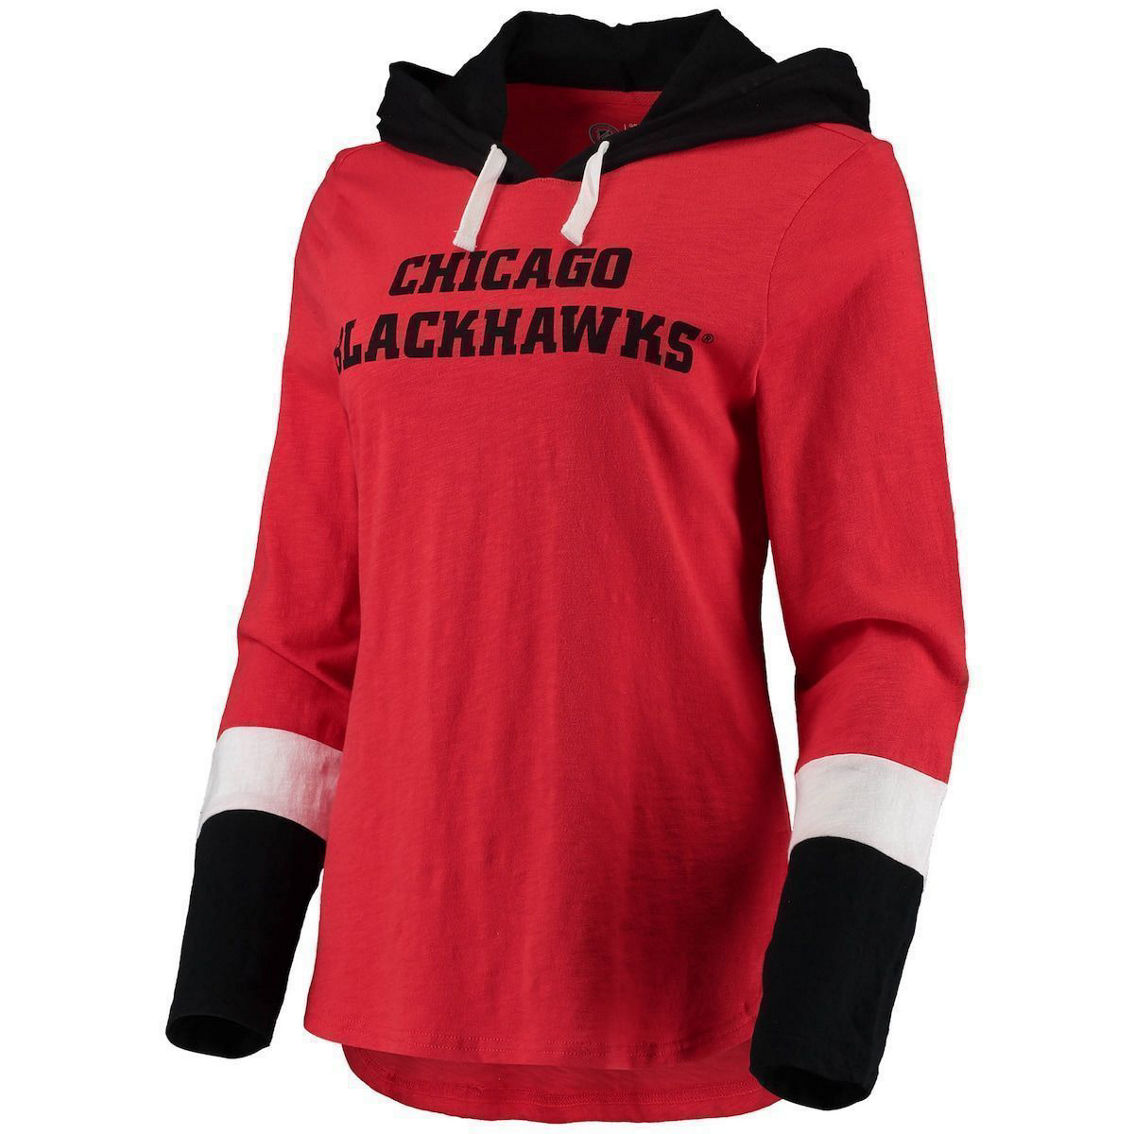 G-III 4Her by Carl Banks Women's Red Chicago Blackhawks Passing Play Hoodie Long Sleeve T-Shirt - Image 3 of 4